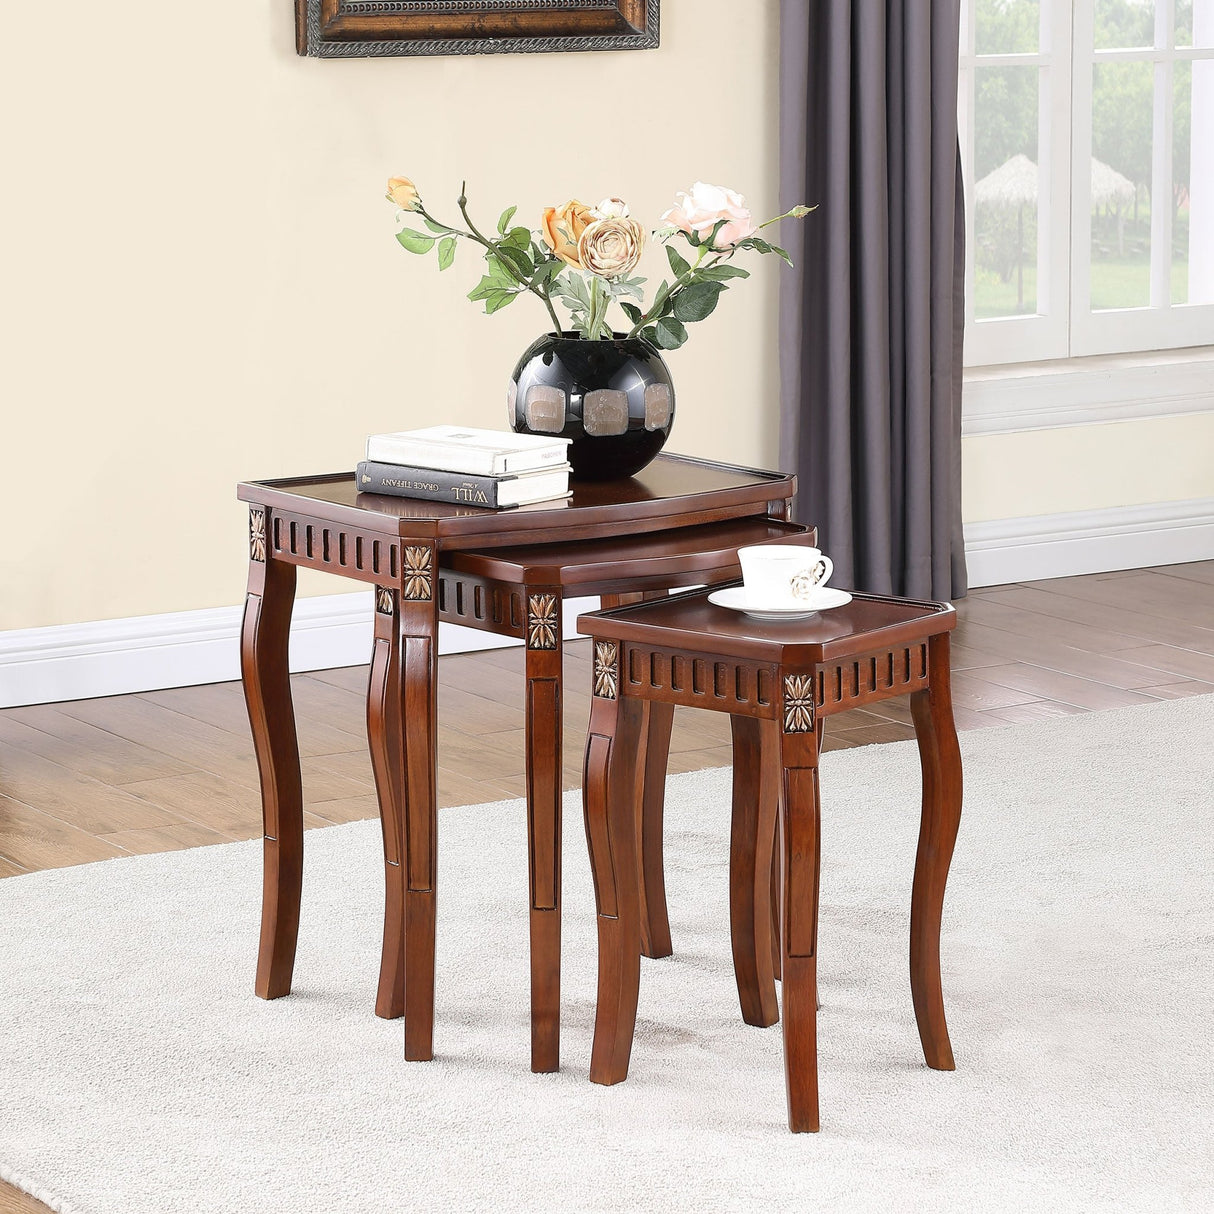 3 Pc Nesting Table - Daphne 3-piece Curved Leg Nesting Tables Warm Brown